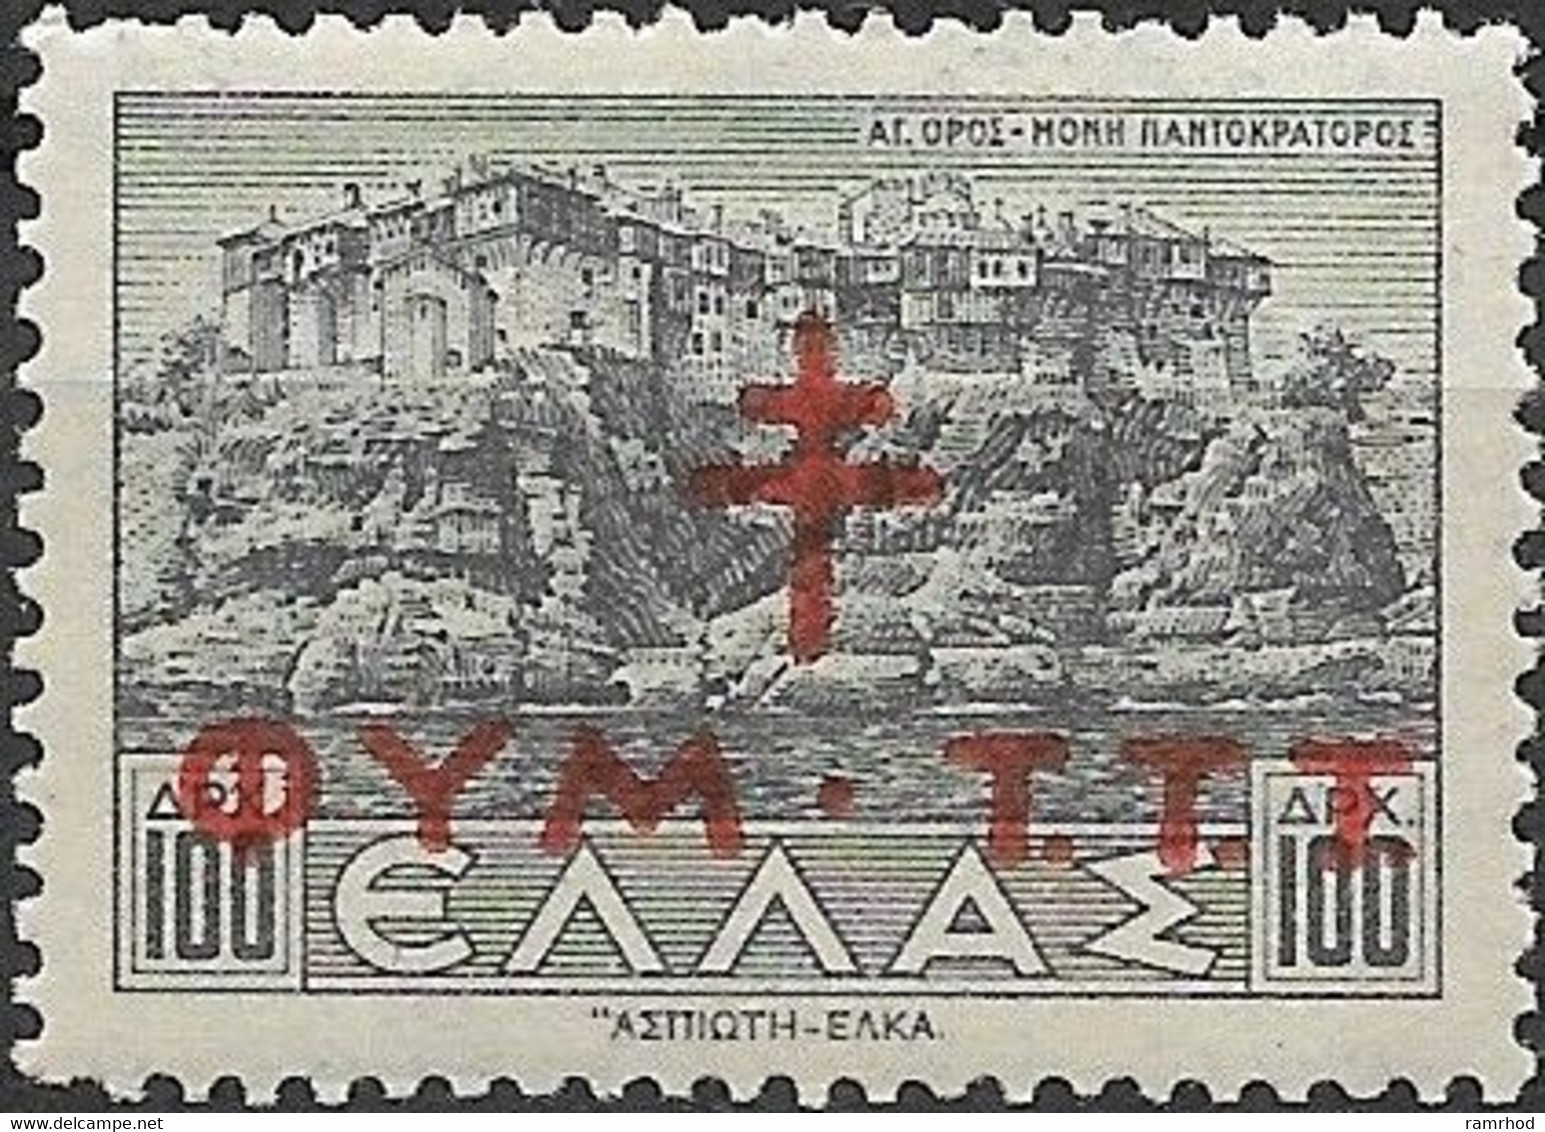 GREECE 1944 Postal Staff Anti-tuberculosis Fund - Mount Athos Monastery Overprinted - 100d. - Black MH - Charity Issues